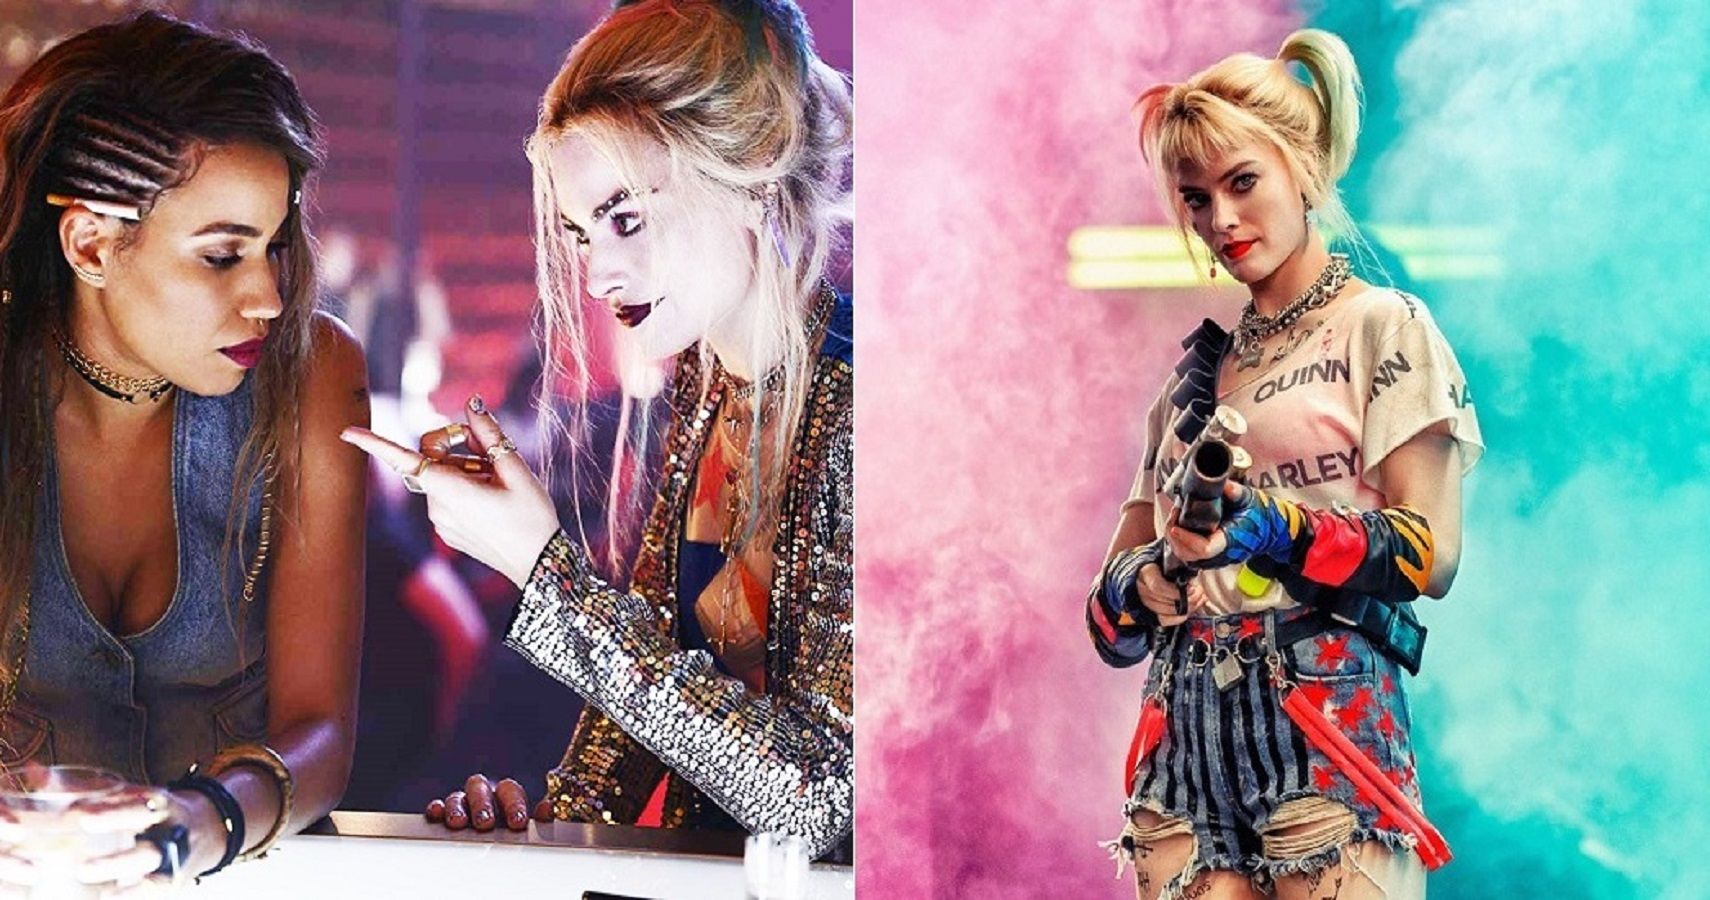 Why Birds of Prey Should've Taken Itself a Bit More Seriously